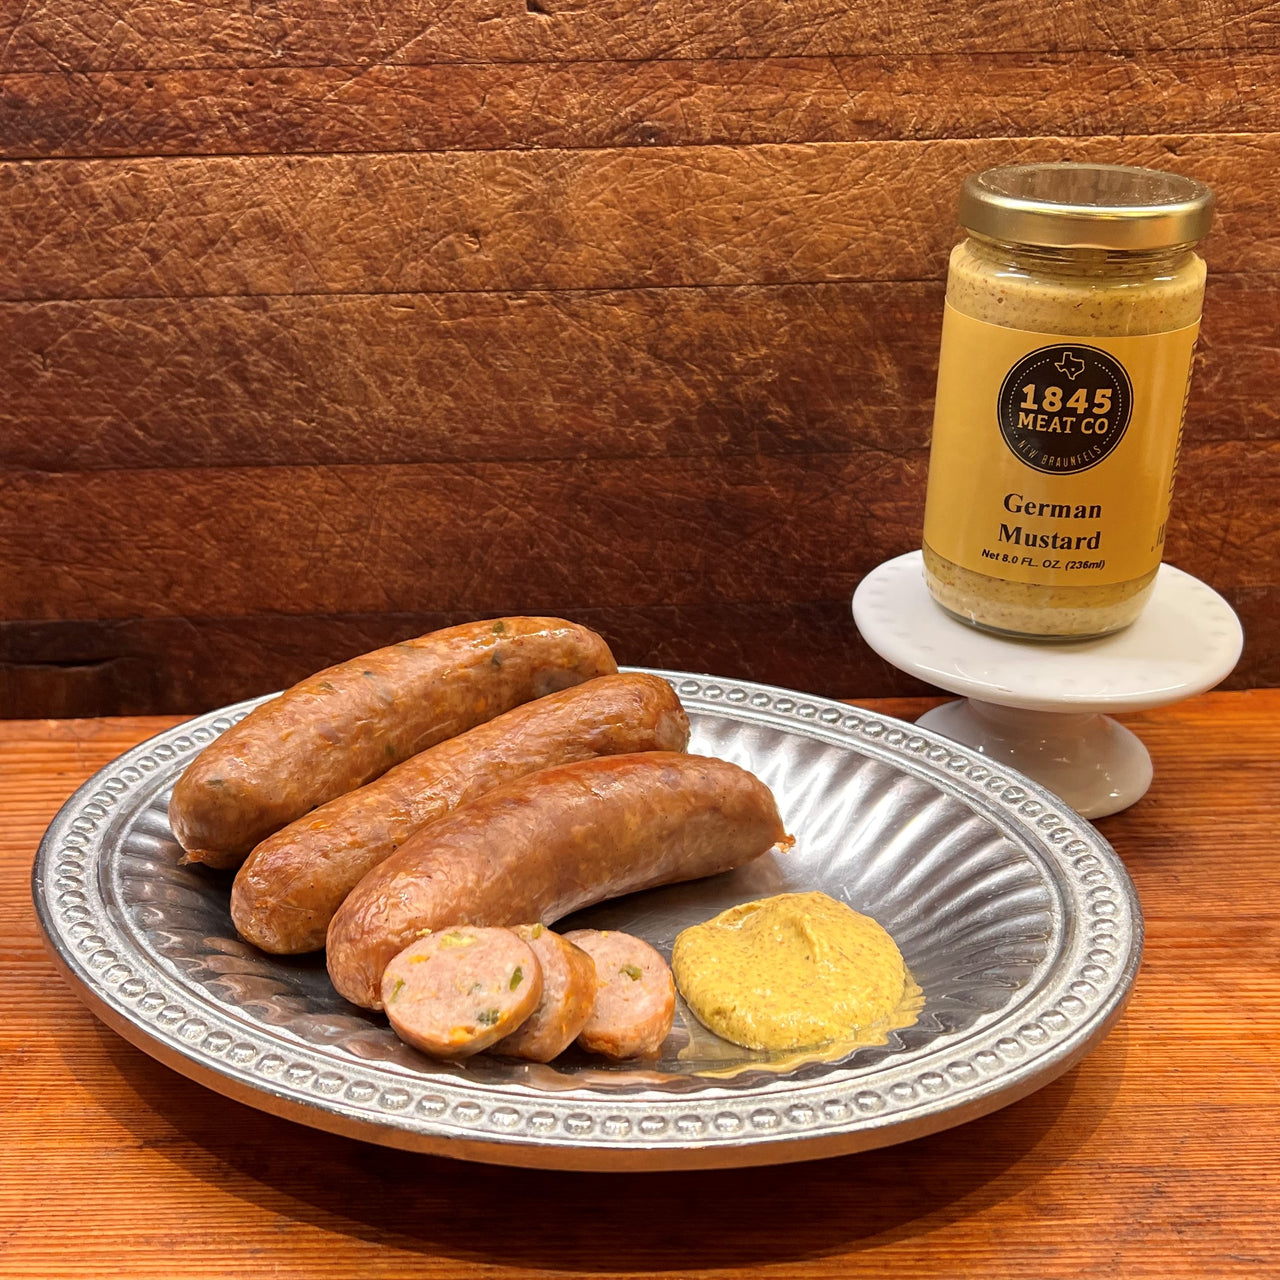 ﻿Our German Mustard is a traditional mustard seed recipe with just right amount of horseradish and spices.